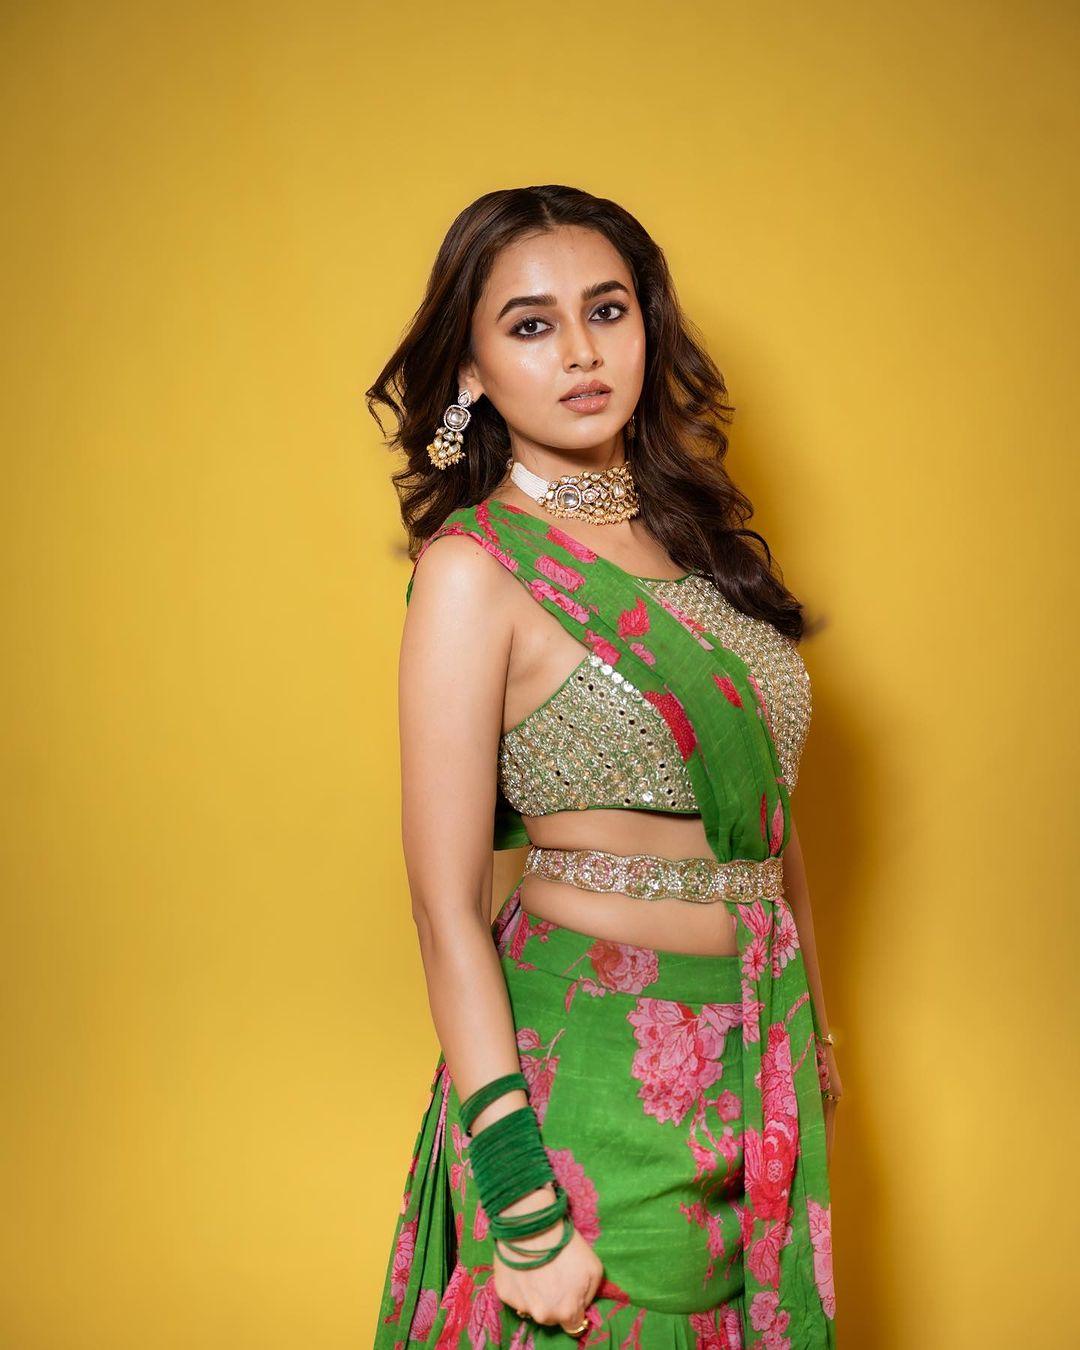 With velvet bangles, hair styled in loose curls, and minimal makeup, Tejasswi stole hearts. Further, she wore big earrings and a stylish necklace, which made this look one of our favourites of all